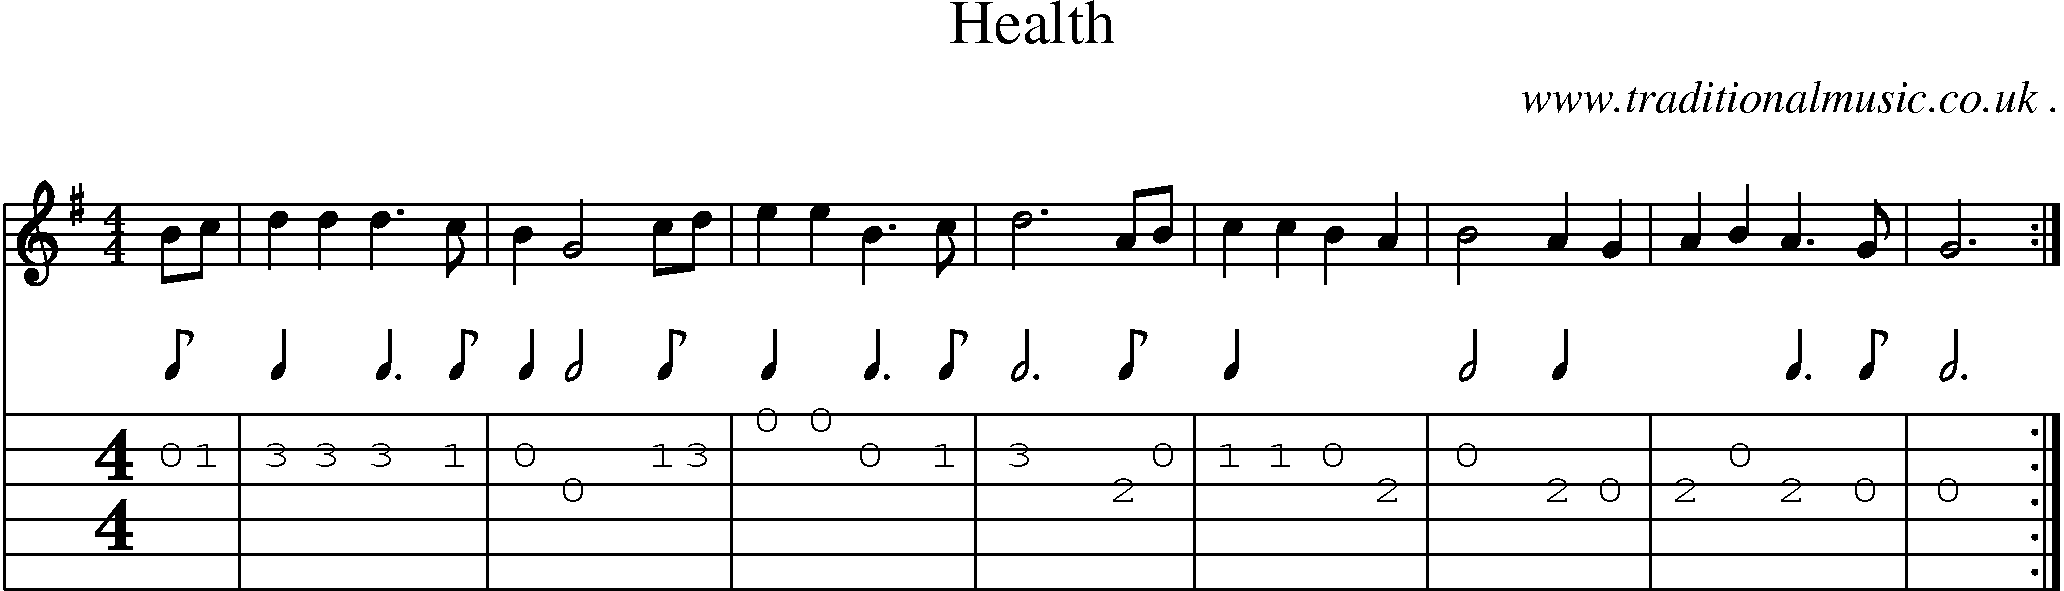 Sheet-Music and Guitar Tabs for Health